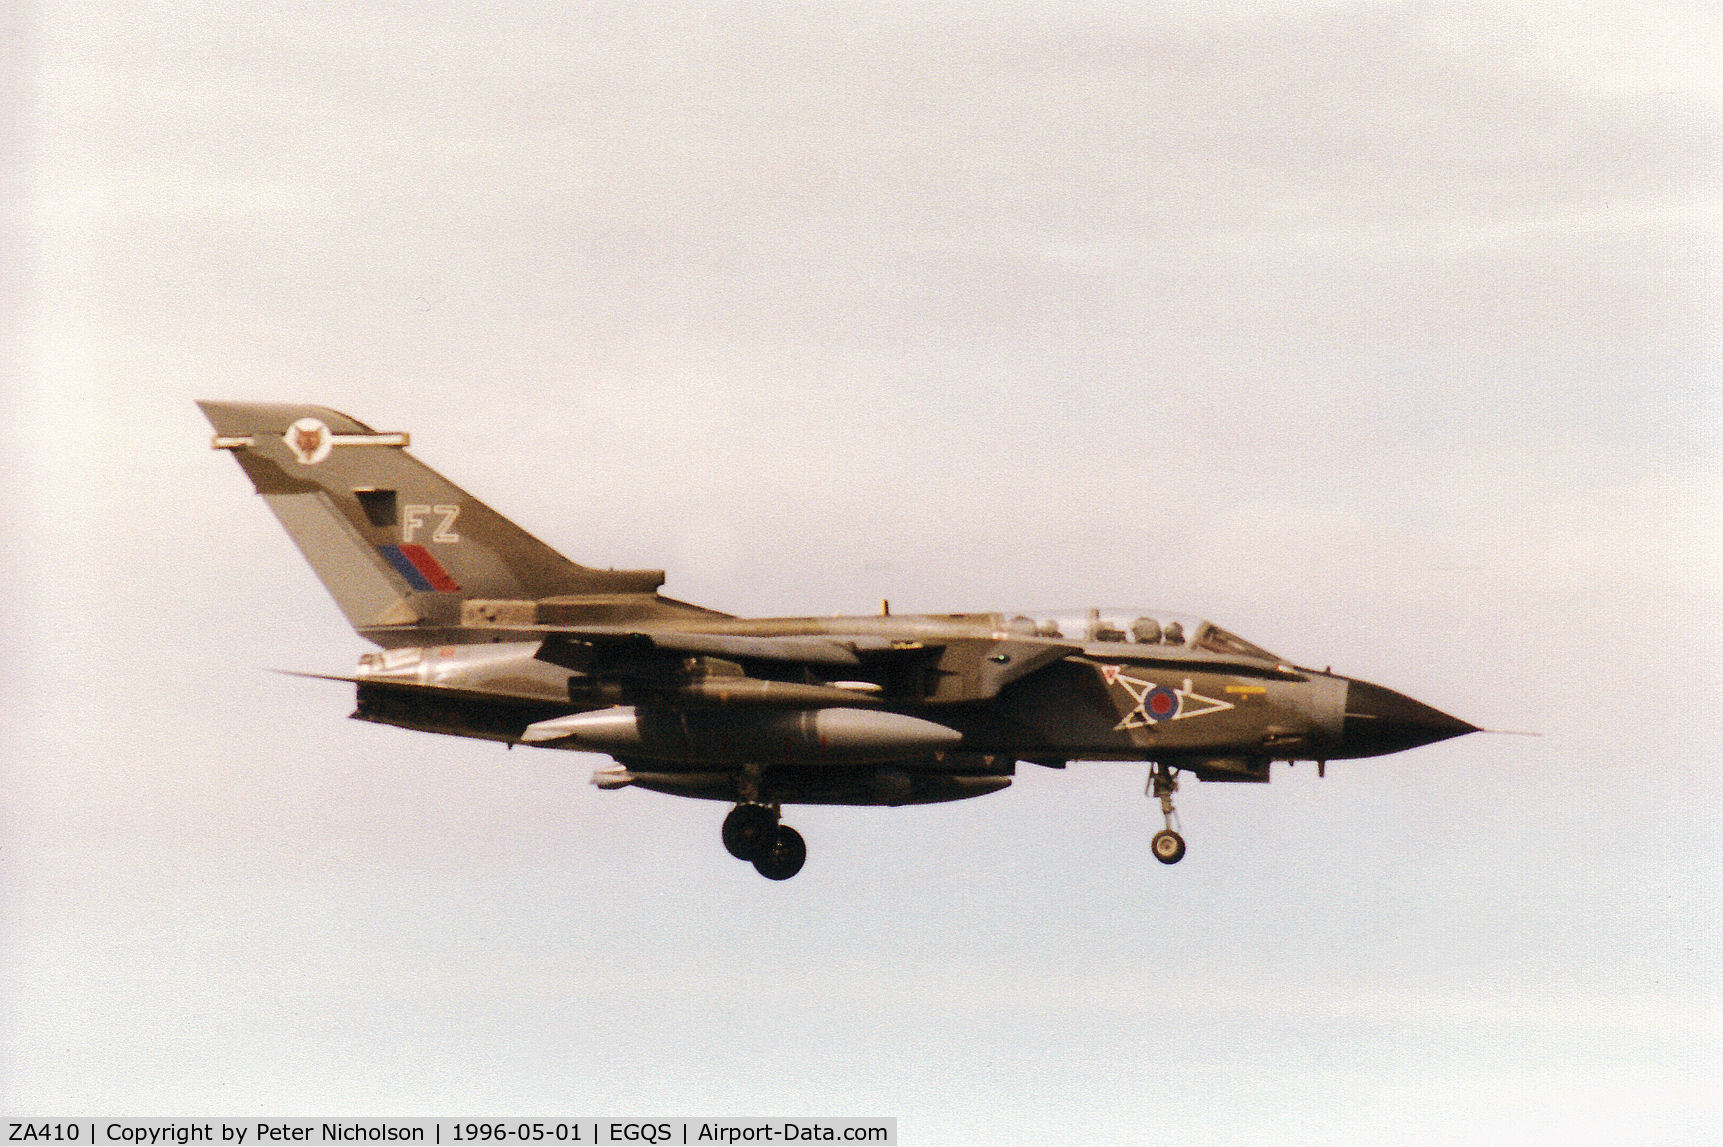 ZA410, 1983 Panavia Tornado GR.1 C/N 227/BT034/3109, Tornado GR.1, callsign Jackal 4, of 12 Squadron on final approach to Runway 05 at RAF Lossiemouth in May 1996.